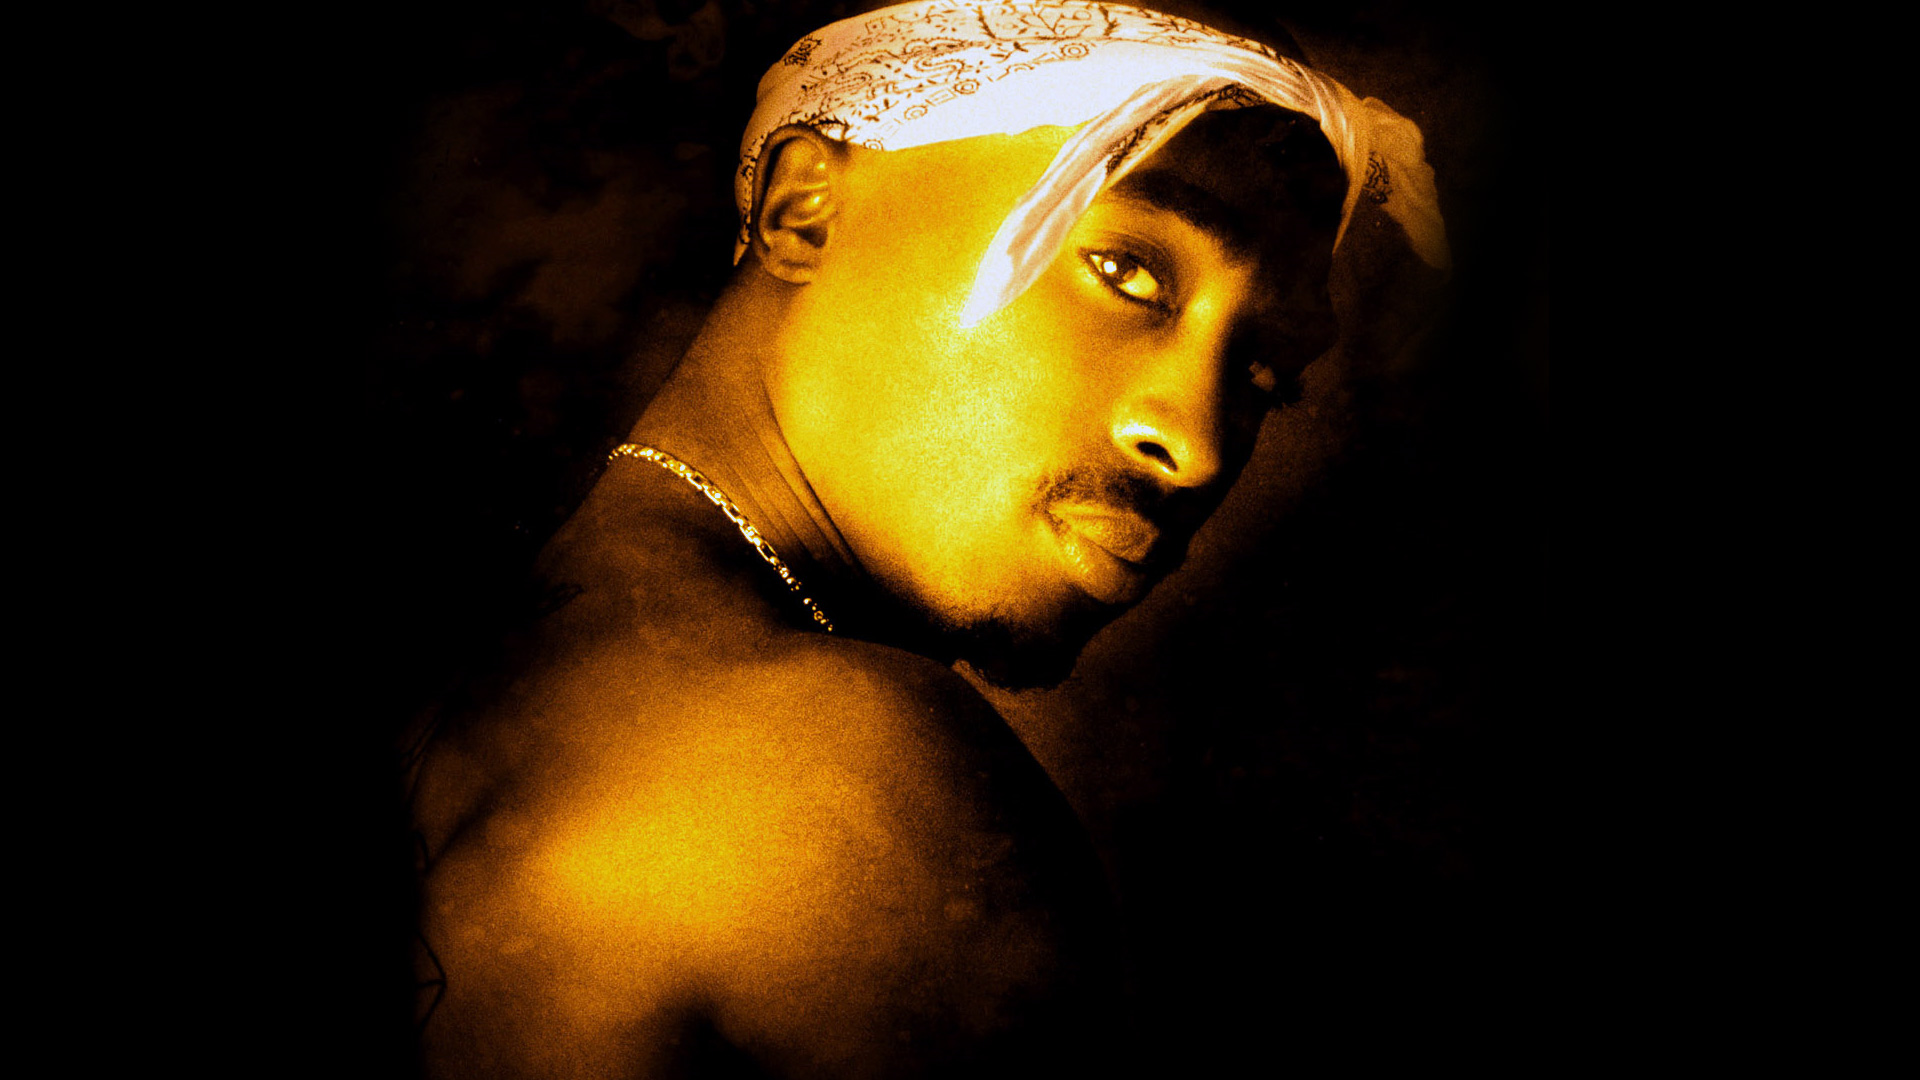 Tupac Shakur wallpapers for desktop, download free Tupac Shakur pictures  and backgrounds for PC | mob.org